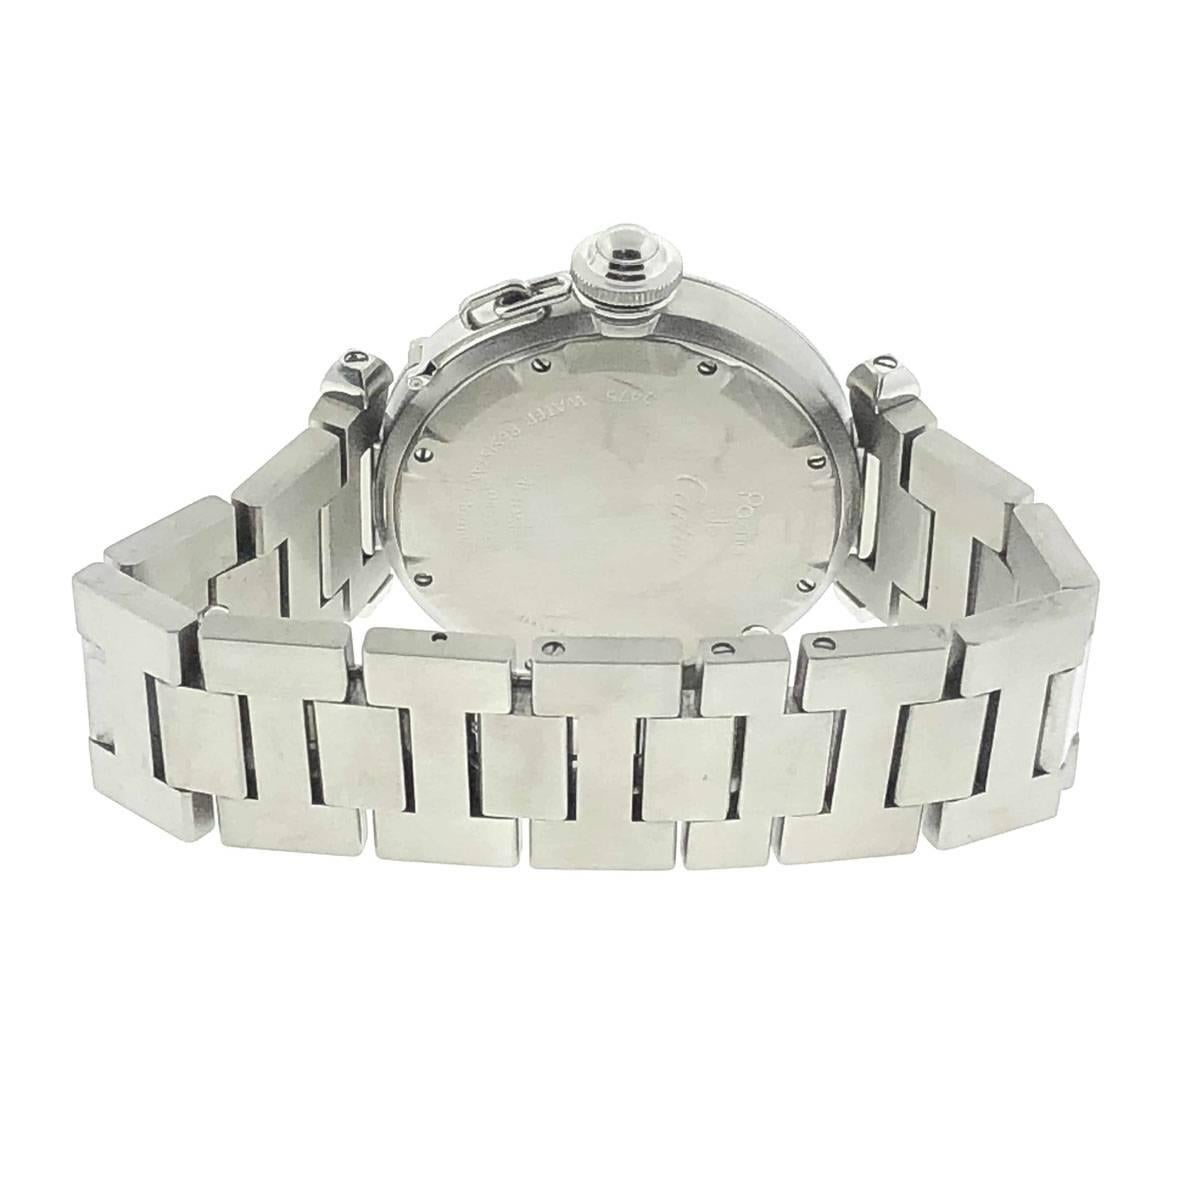 Women's or Men's Cartier Pasha 2475 Date Stainless Steel Automatic Watch